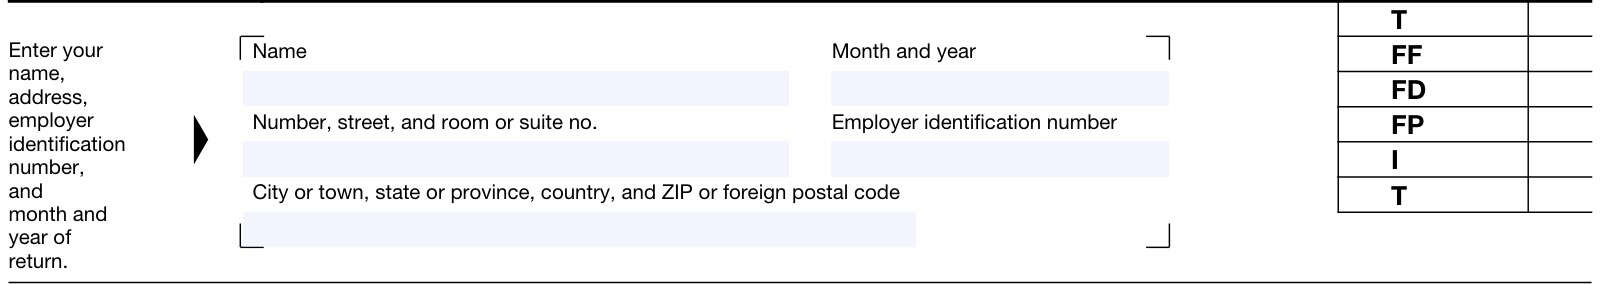 irs form 730, taxpayer information